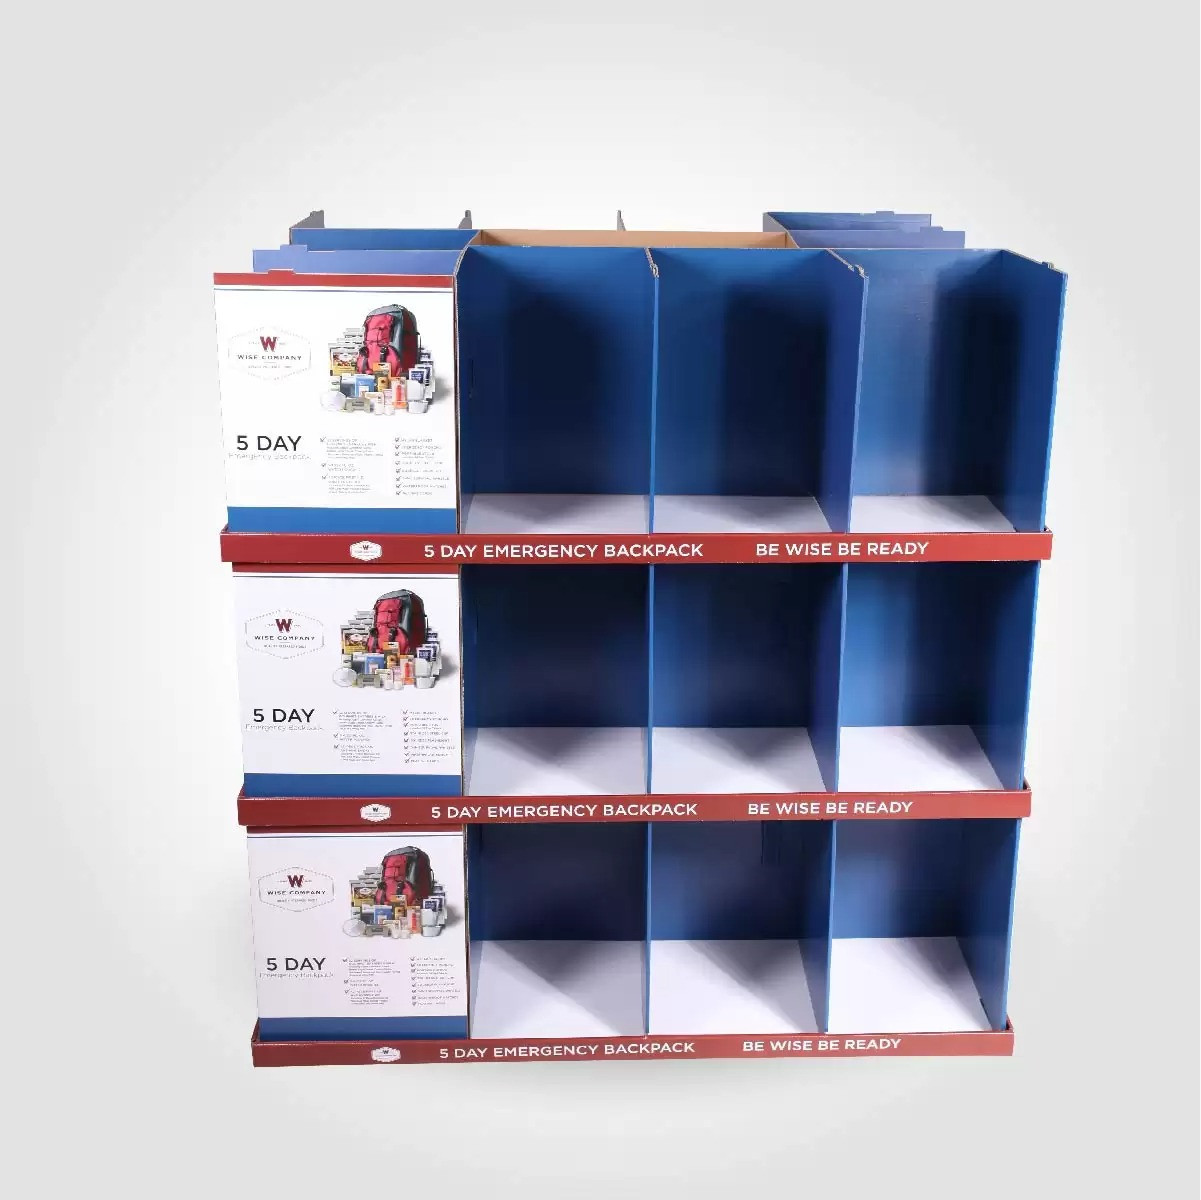 One of Hottest for Custom Pos Displays - Costco 3 layers Full Pallet Display for 5 Day Emergency Backpack – Raymin